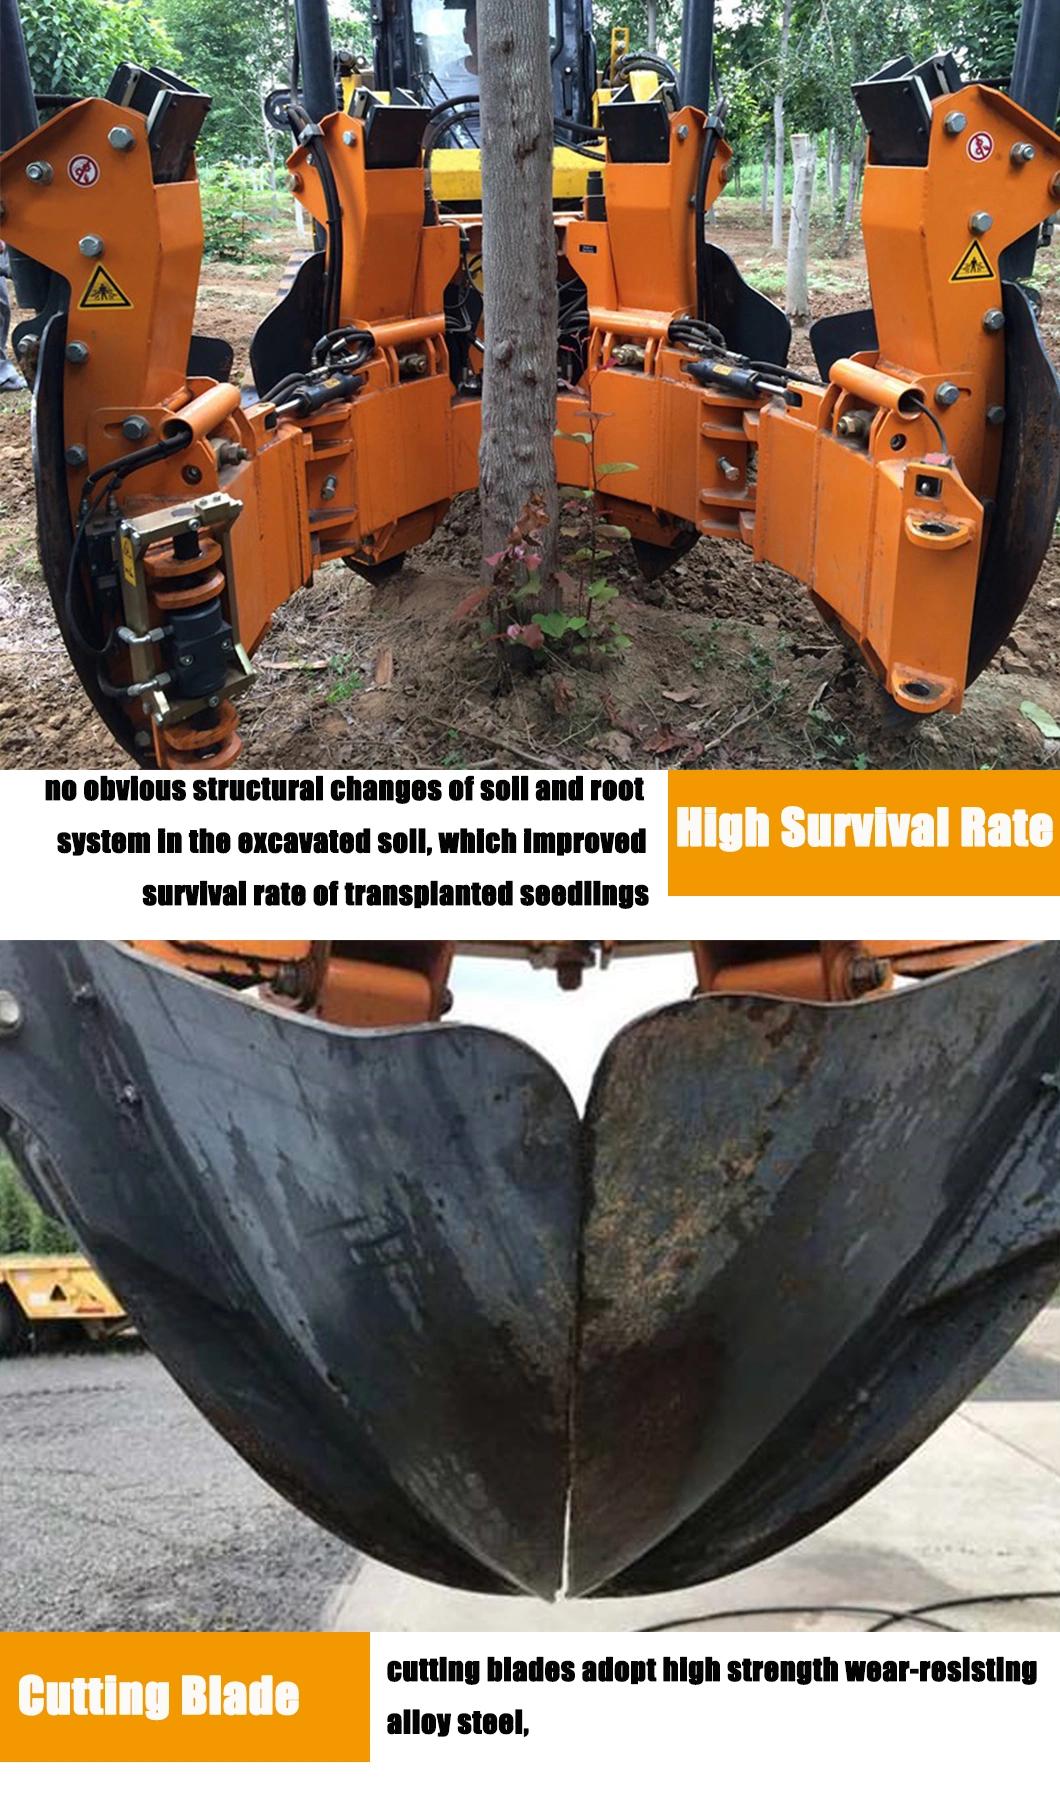 Skid Steer Hydraulic Digging Spade Tree Removal Tree Transplanter for Sale